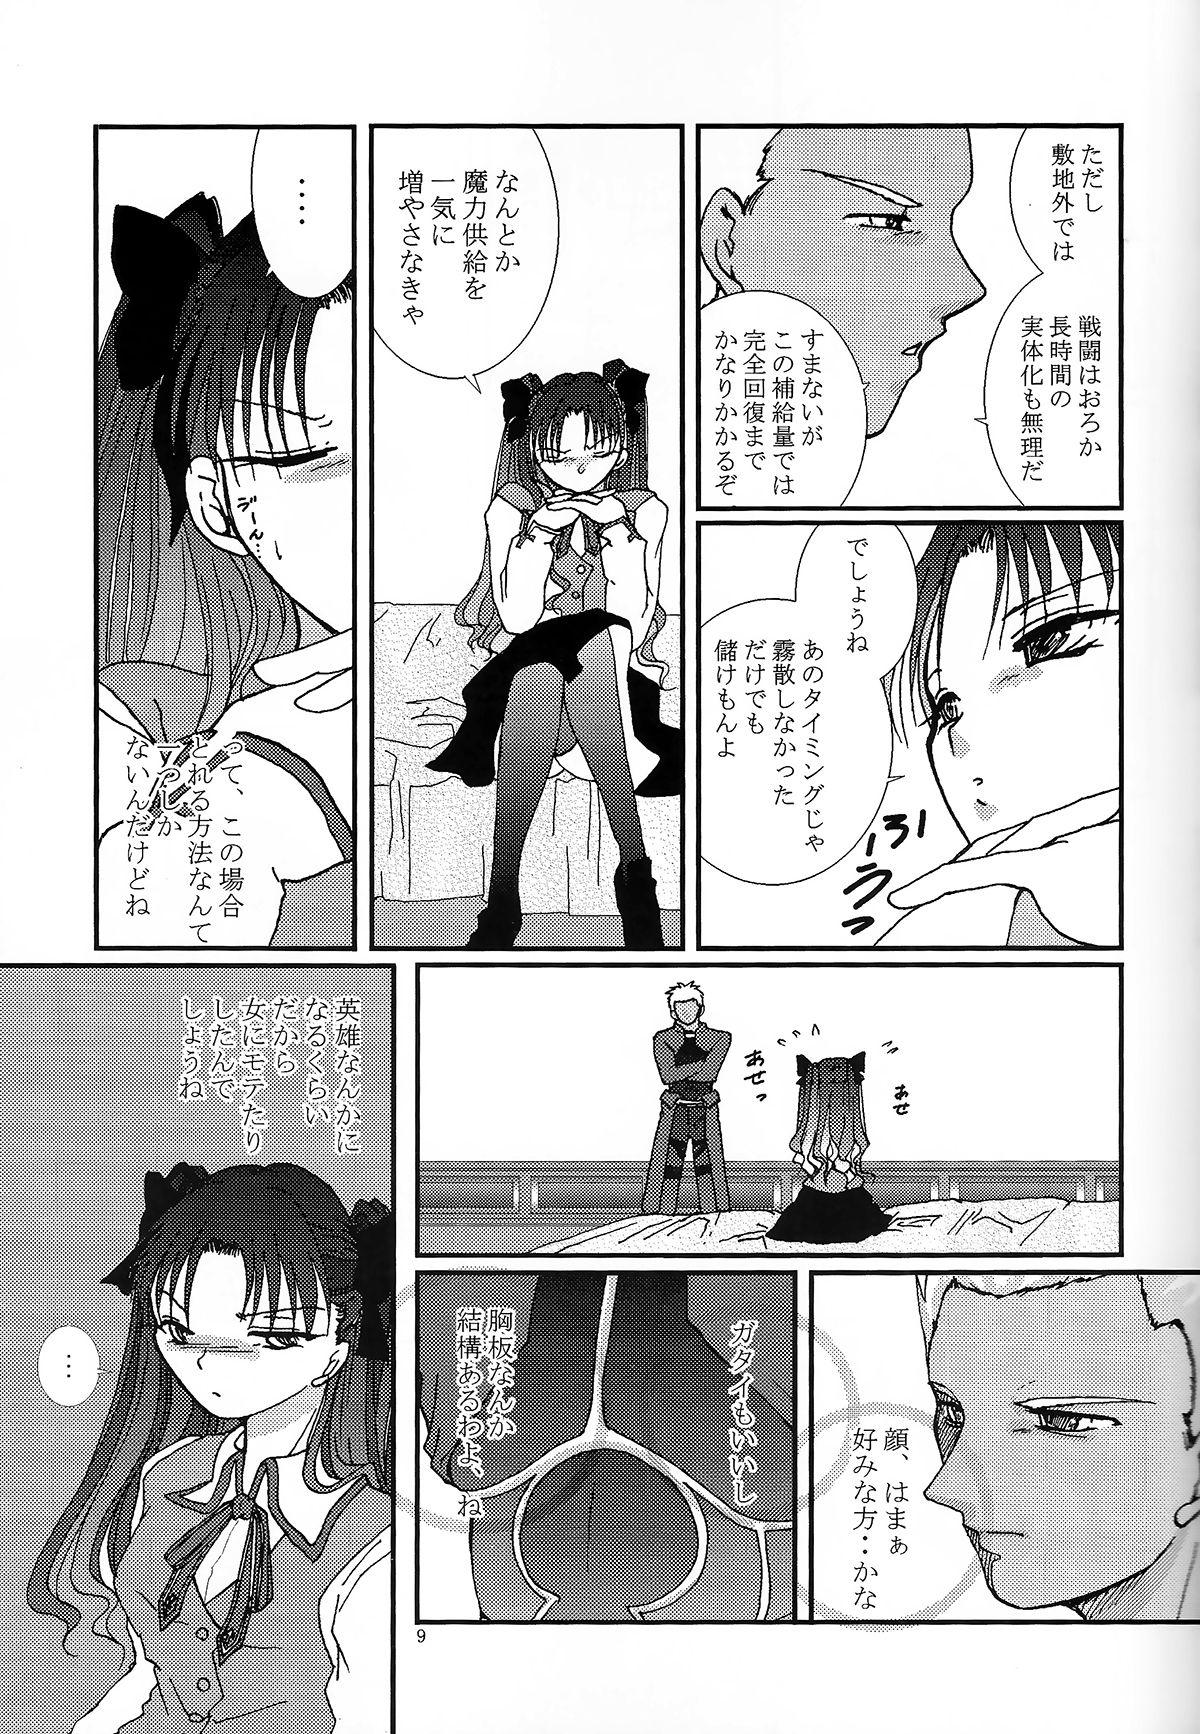 Hot Women Having Sex Question-7 - Fate stay night Satin - Page 7